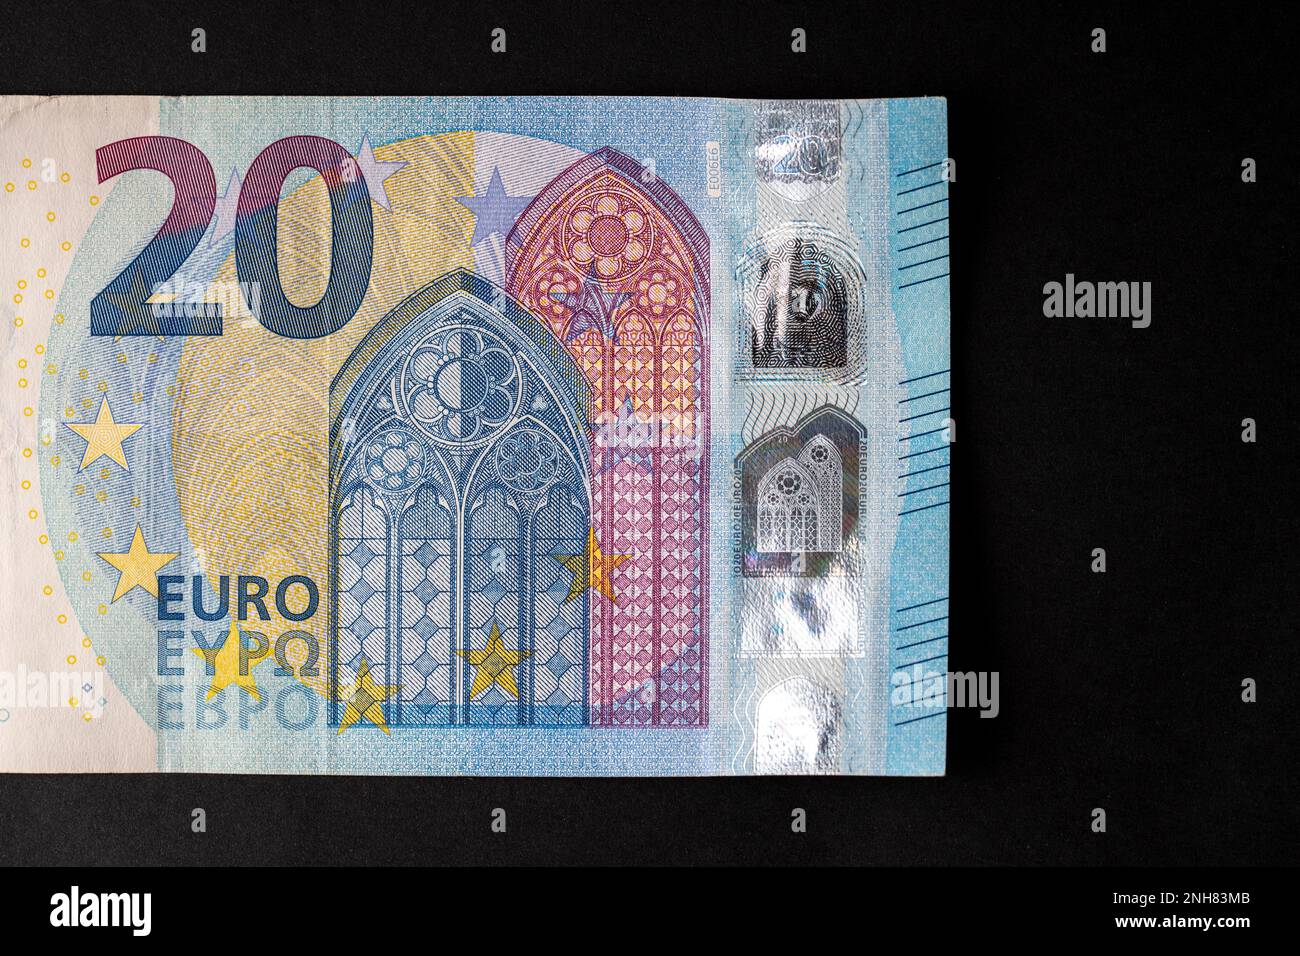 20 euro close up on black background for business finance subjects. World money concept, inflation and economy concept. Currency close up in detail. Stock Photo